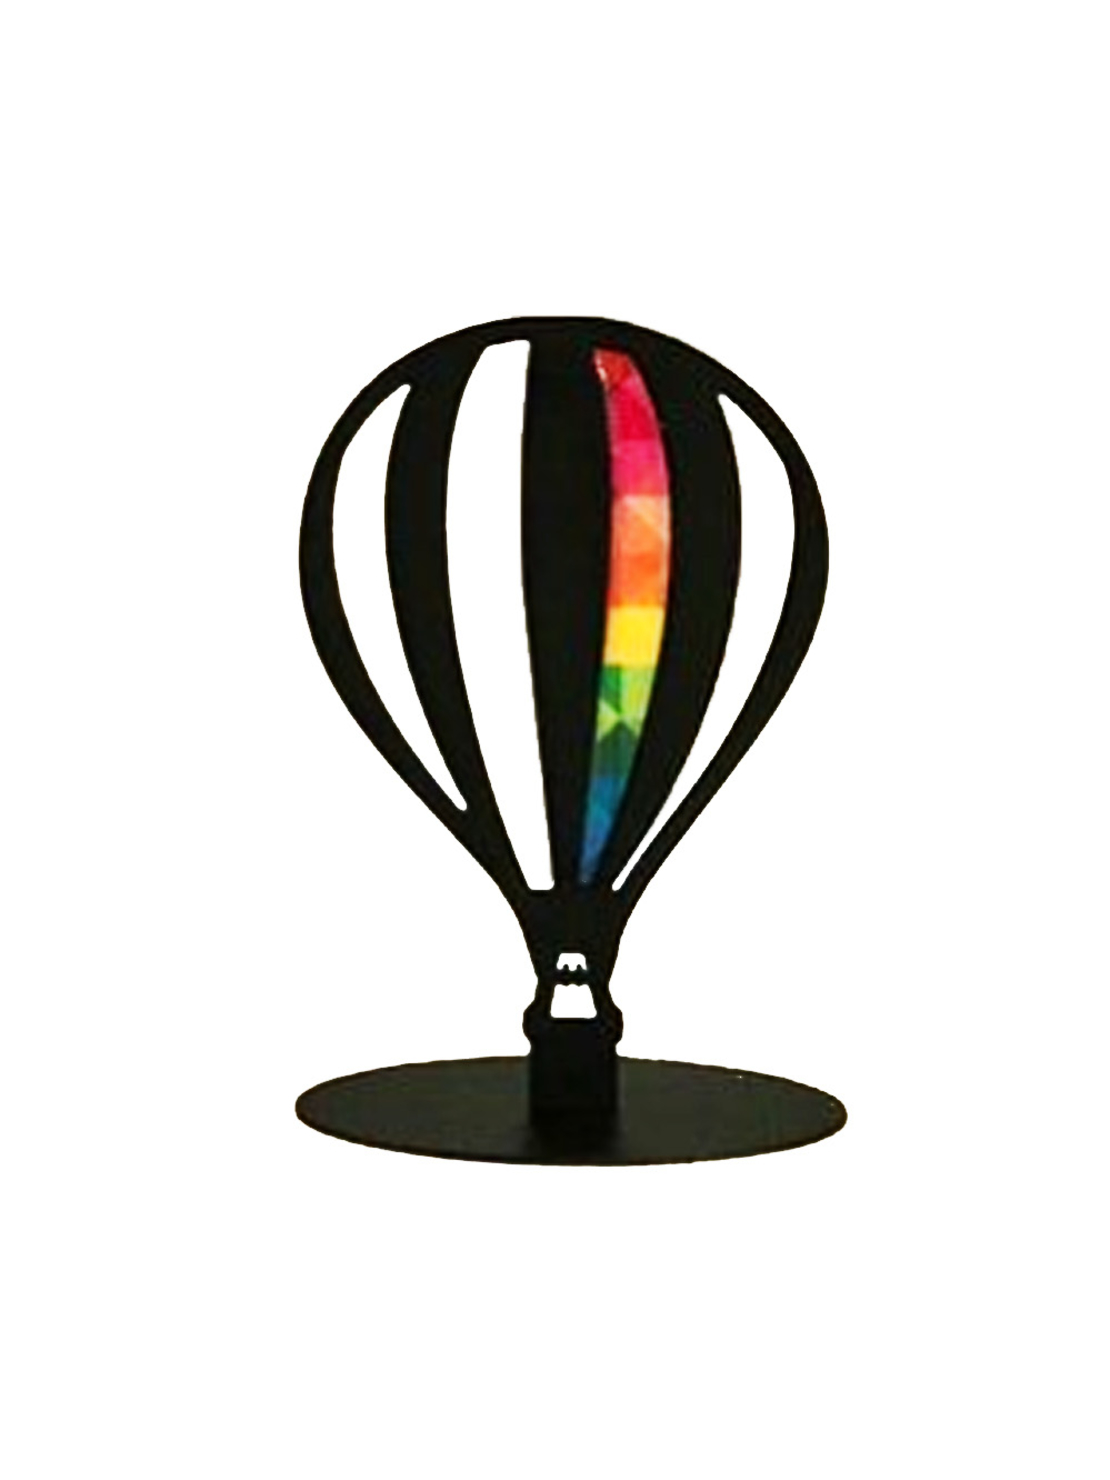 Sculpture of Colorful-Black Hot Air Baloon